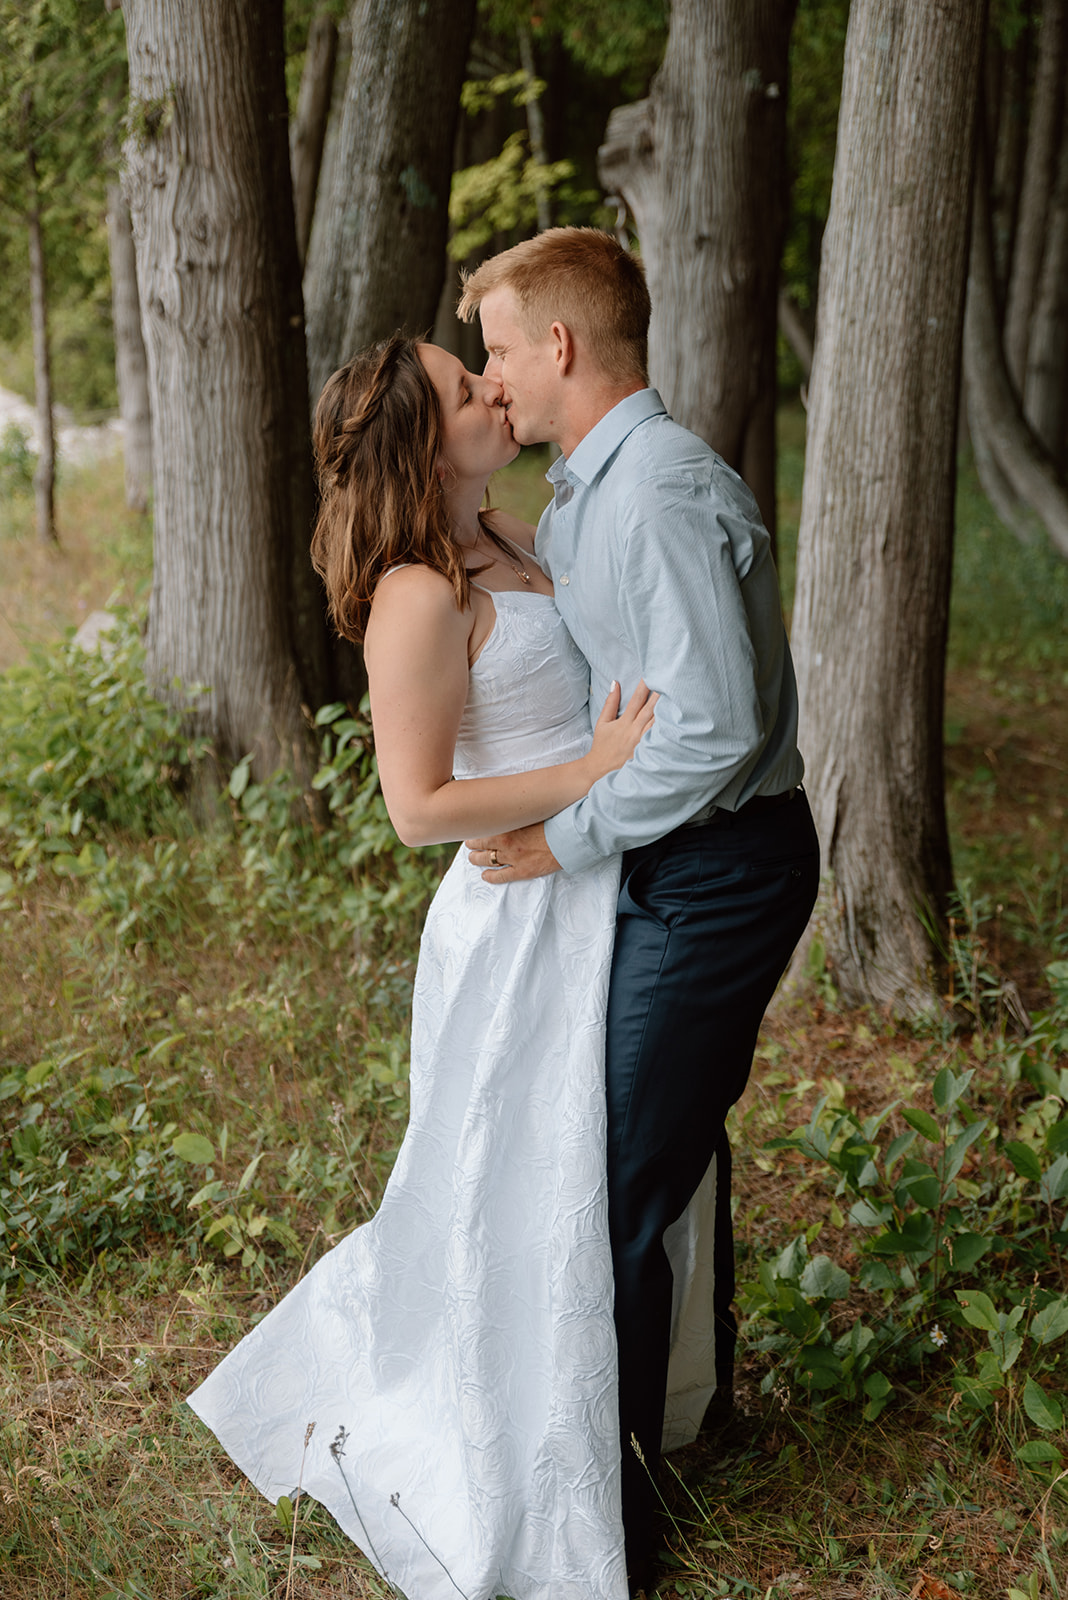 Husband and wife share a kiss among the Door County cedars